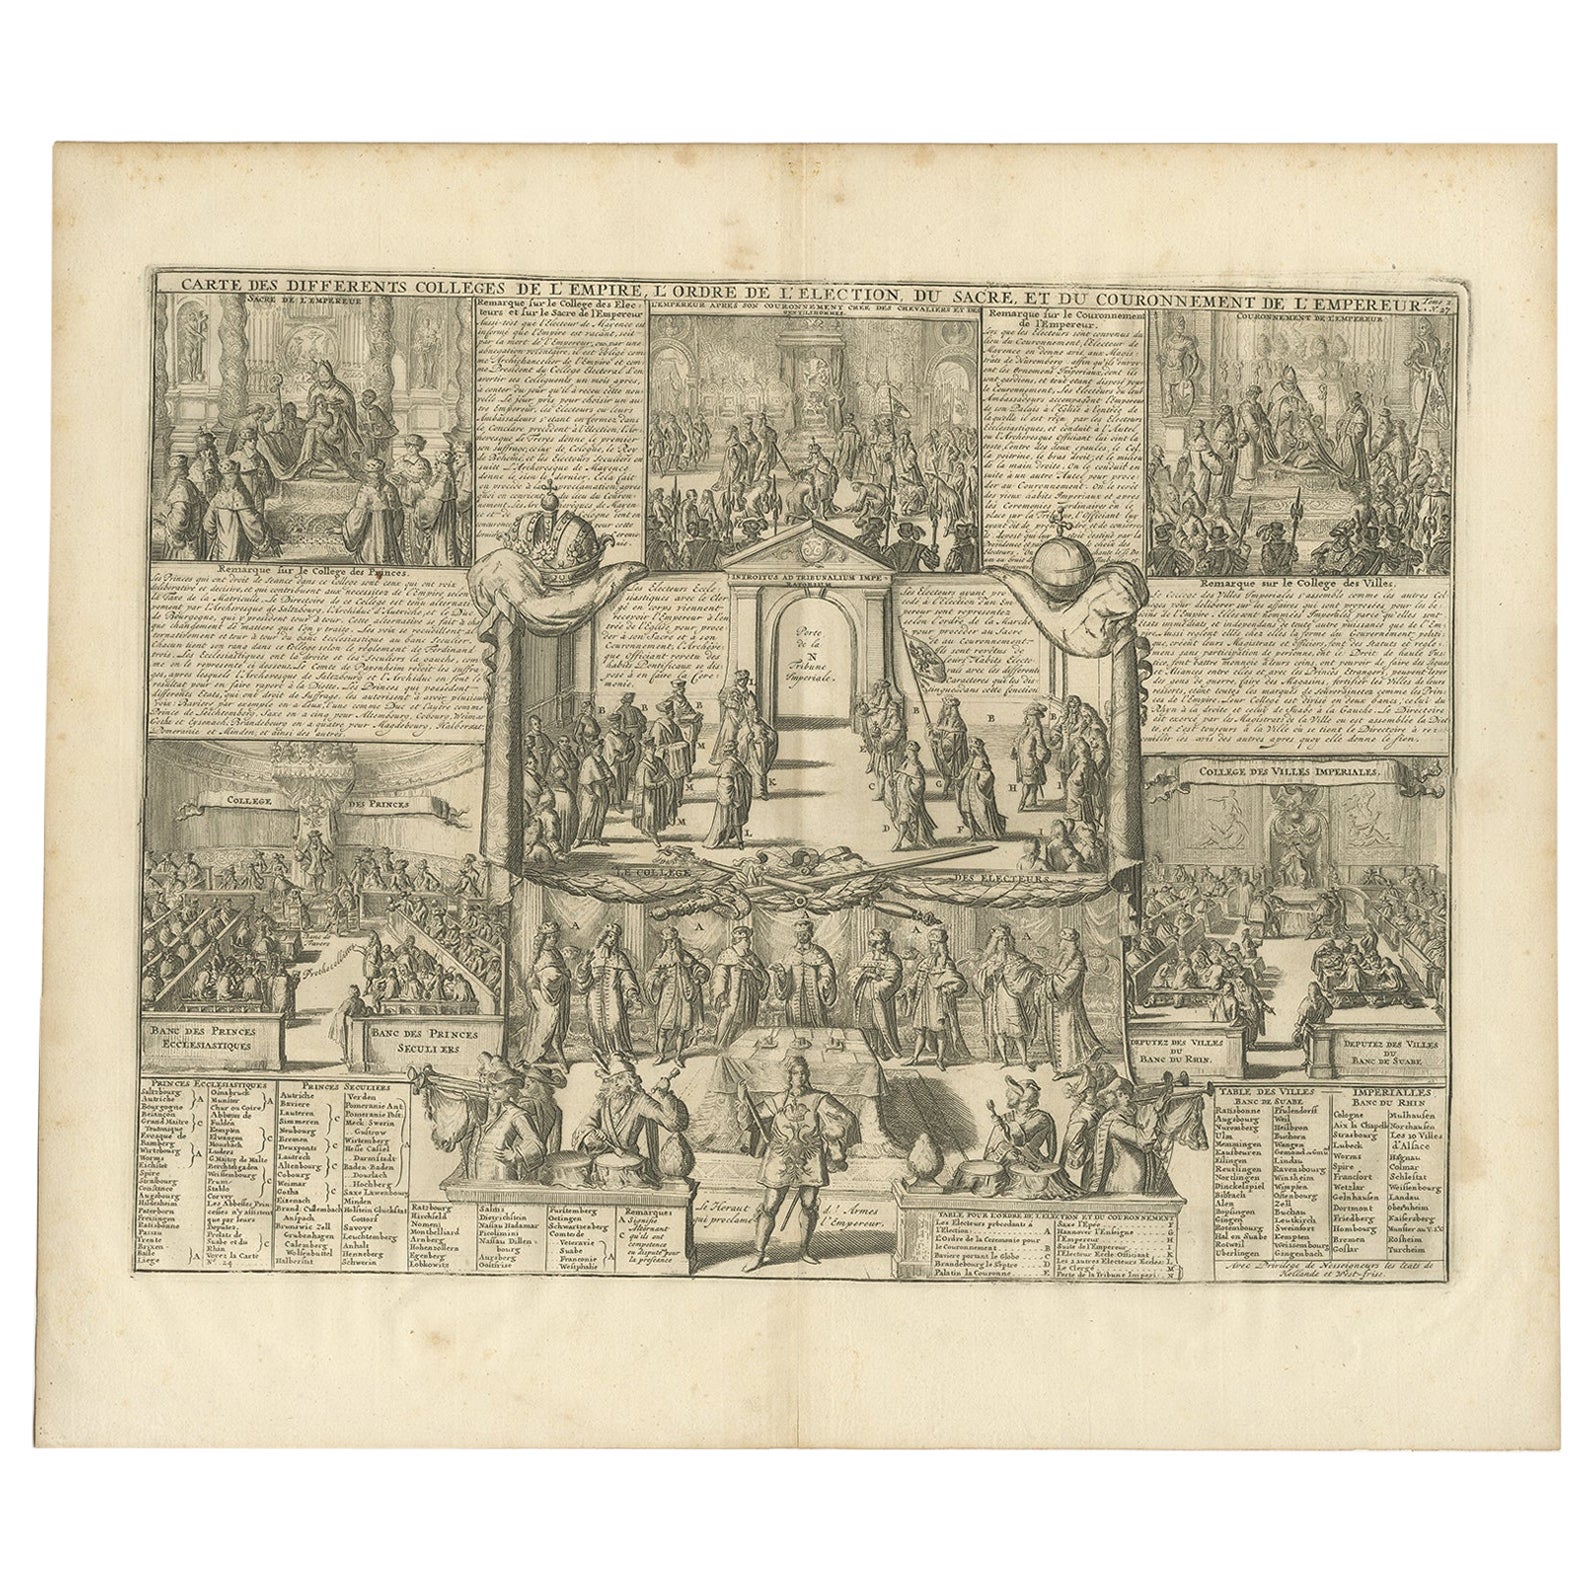 Antique Print of the Coronation of the Emperor by Chatelain, 1732